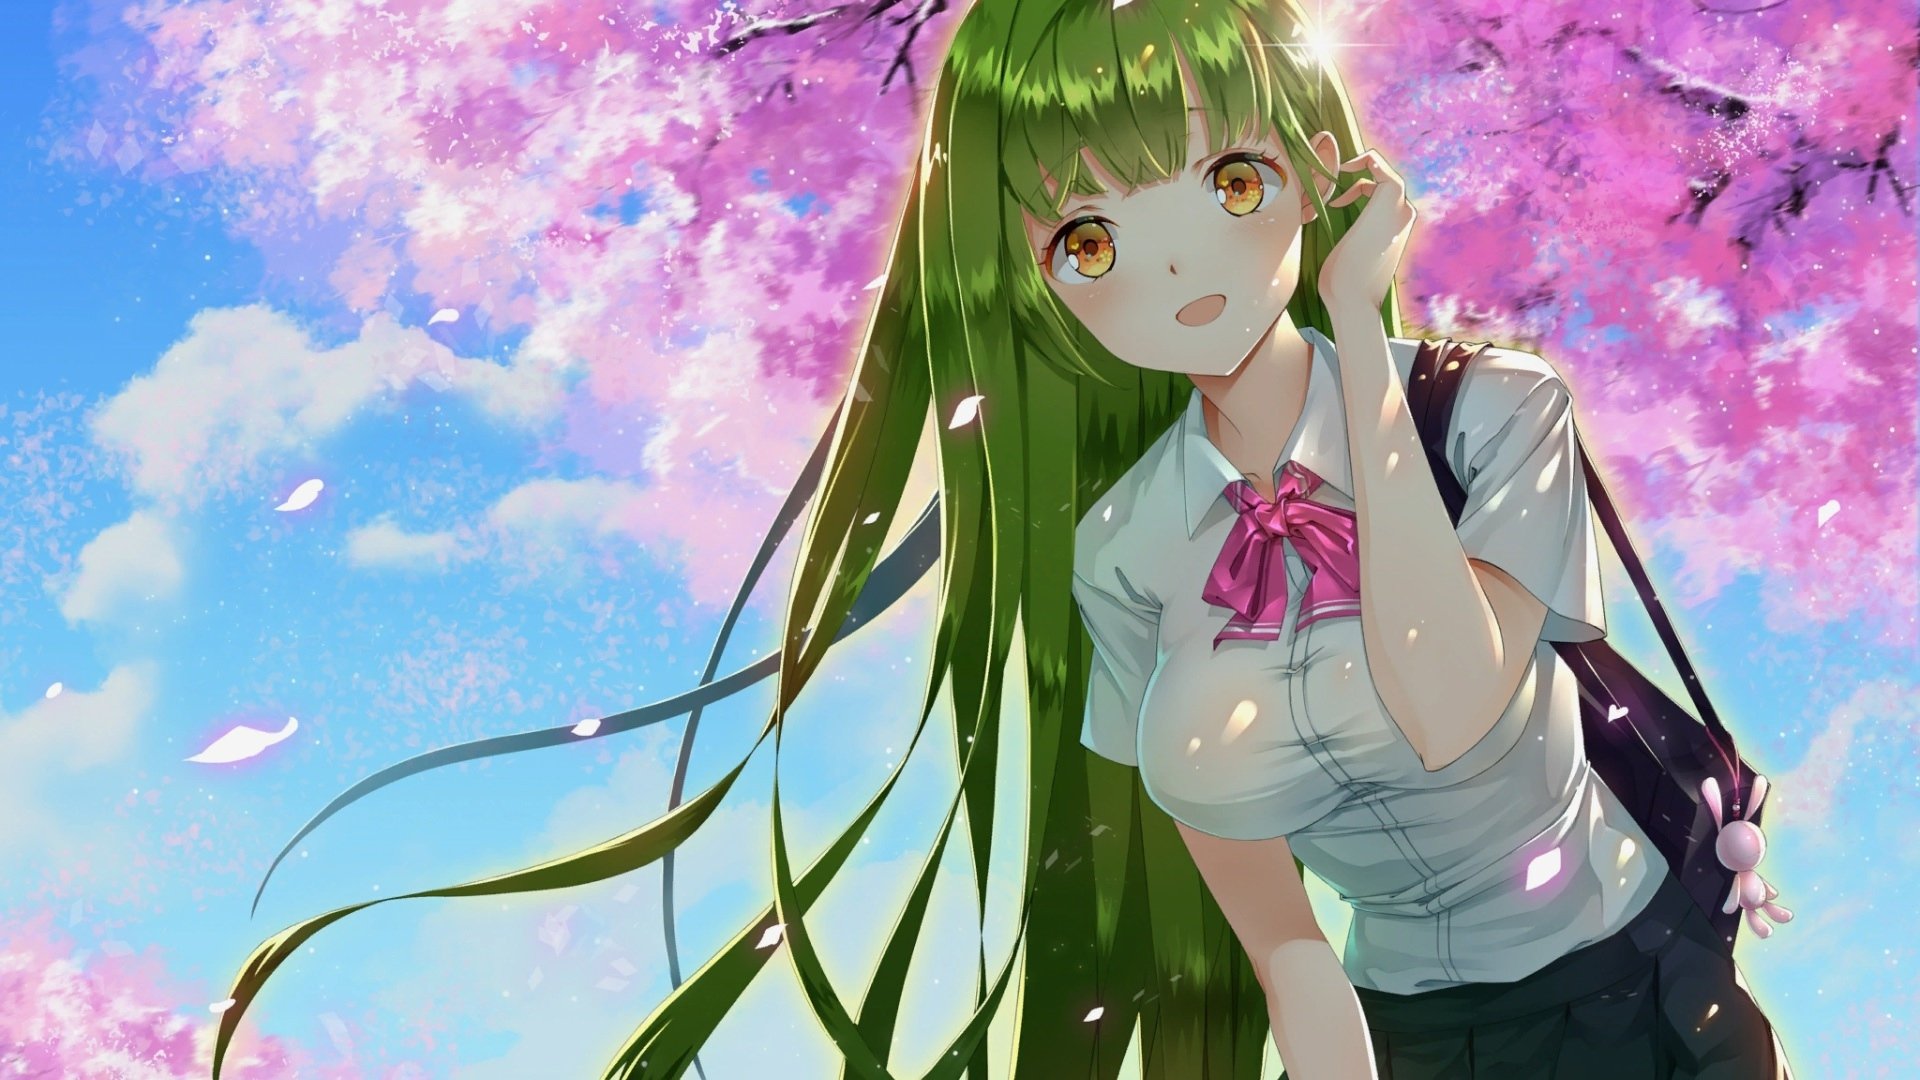 Anime girl with green hair and brown eyes Desktop wallpapers 1920x1080